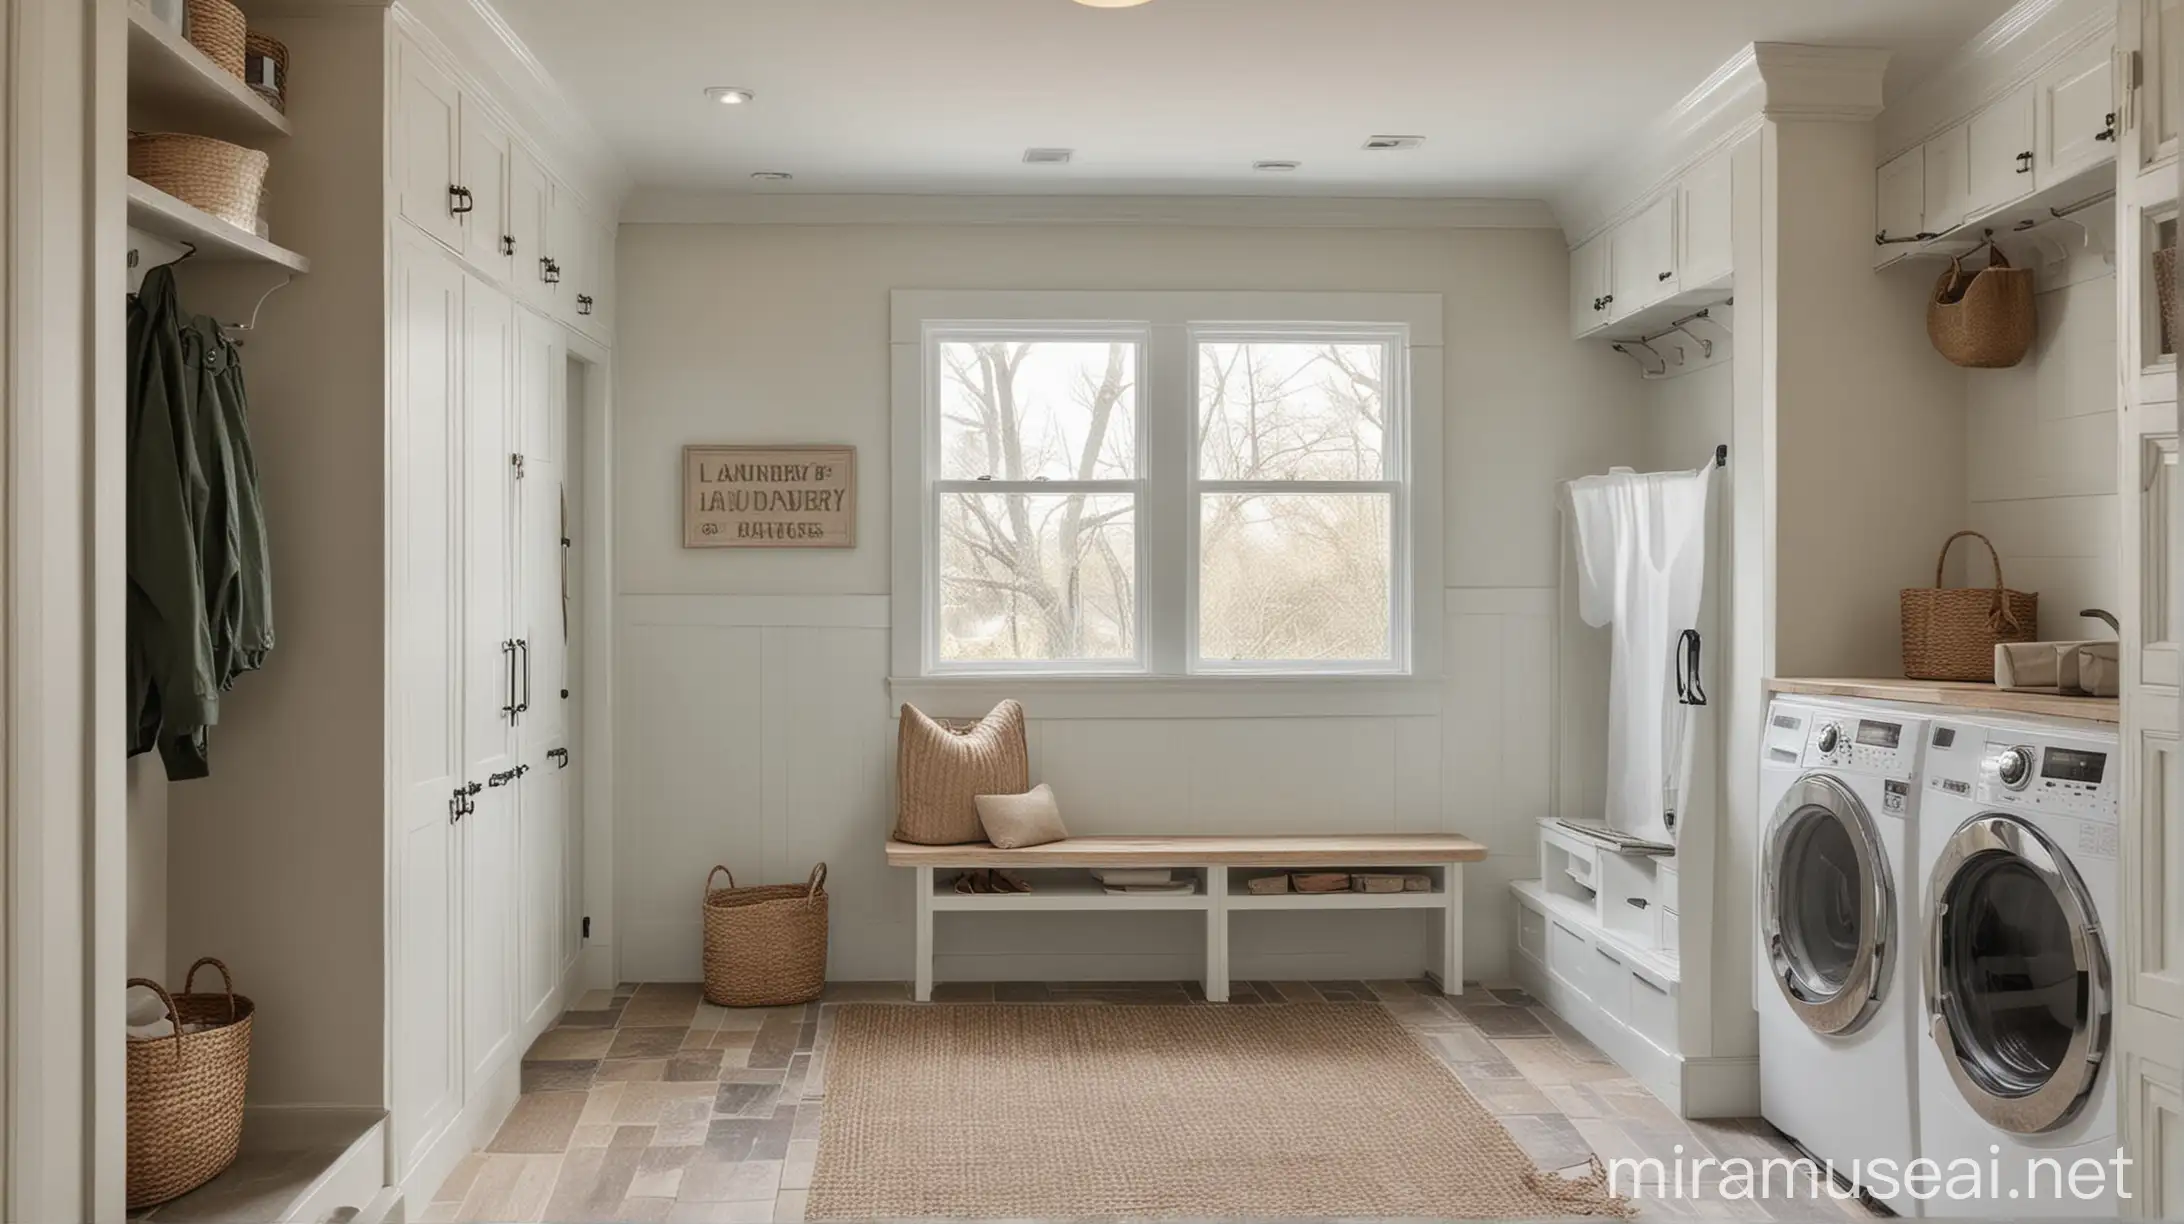 Convenient Mudroom and Laundry Room Combination for Efficient Home Management